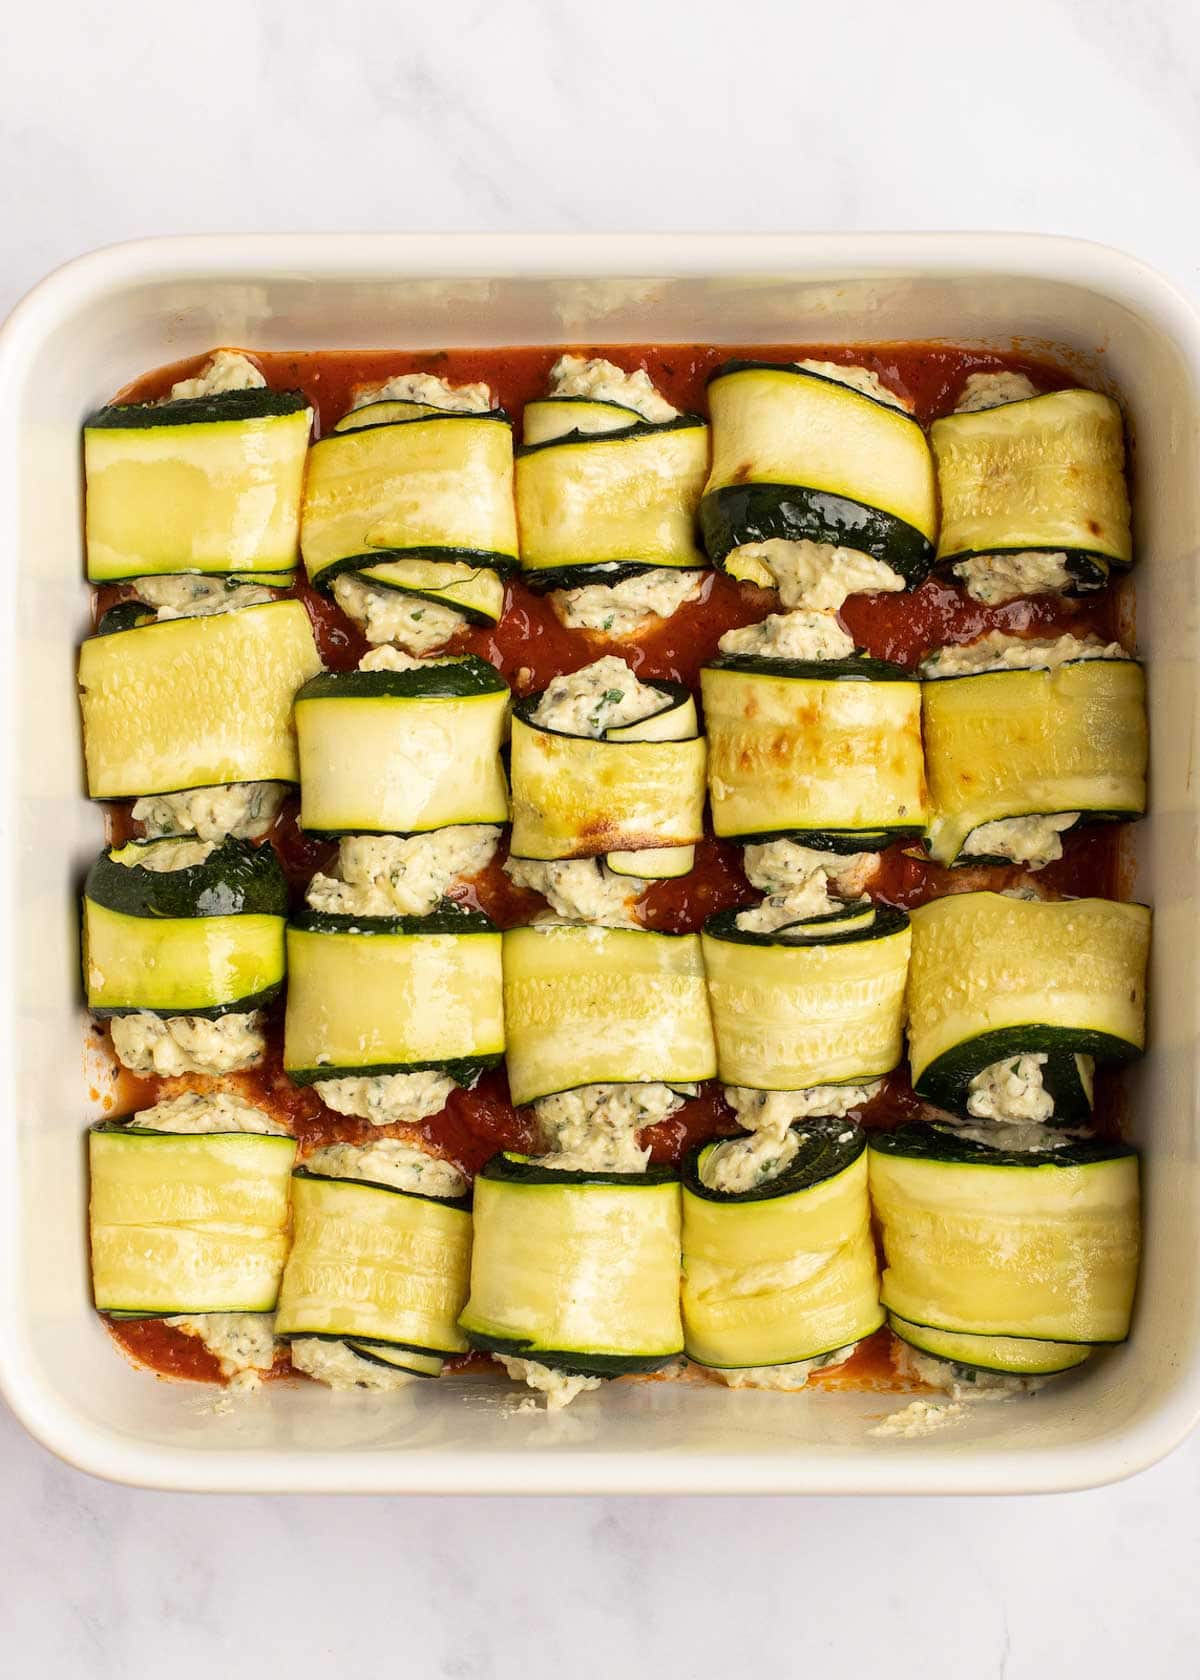 fill the entire pan with zucchini rolls